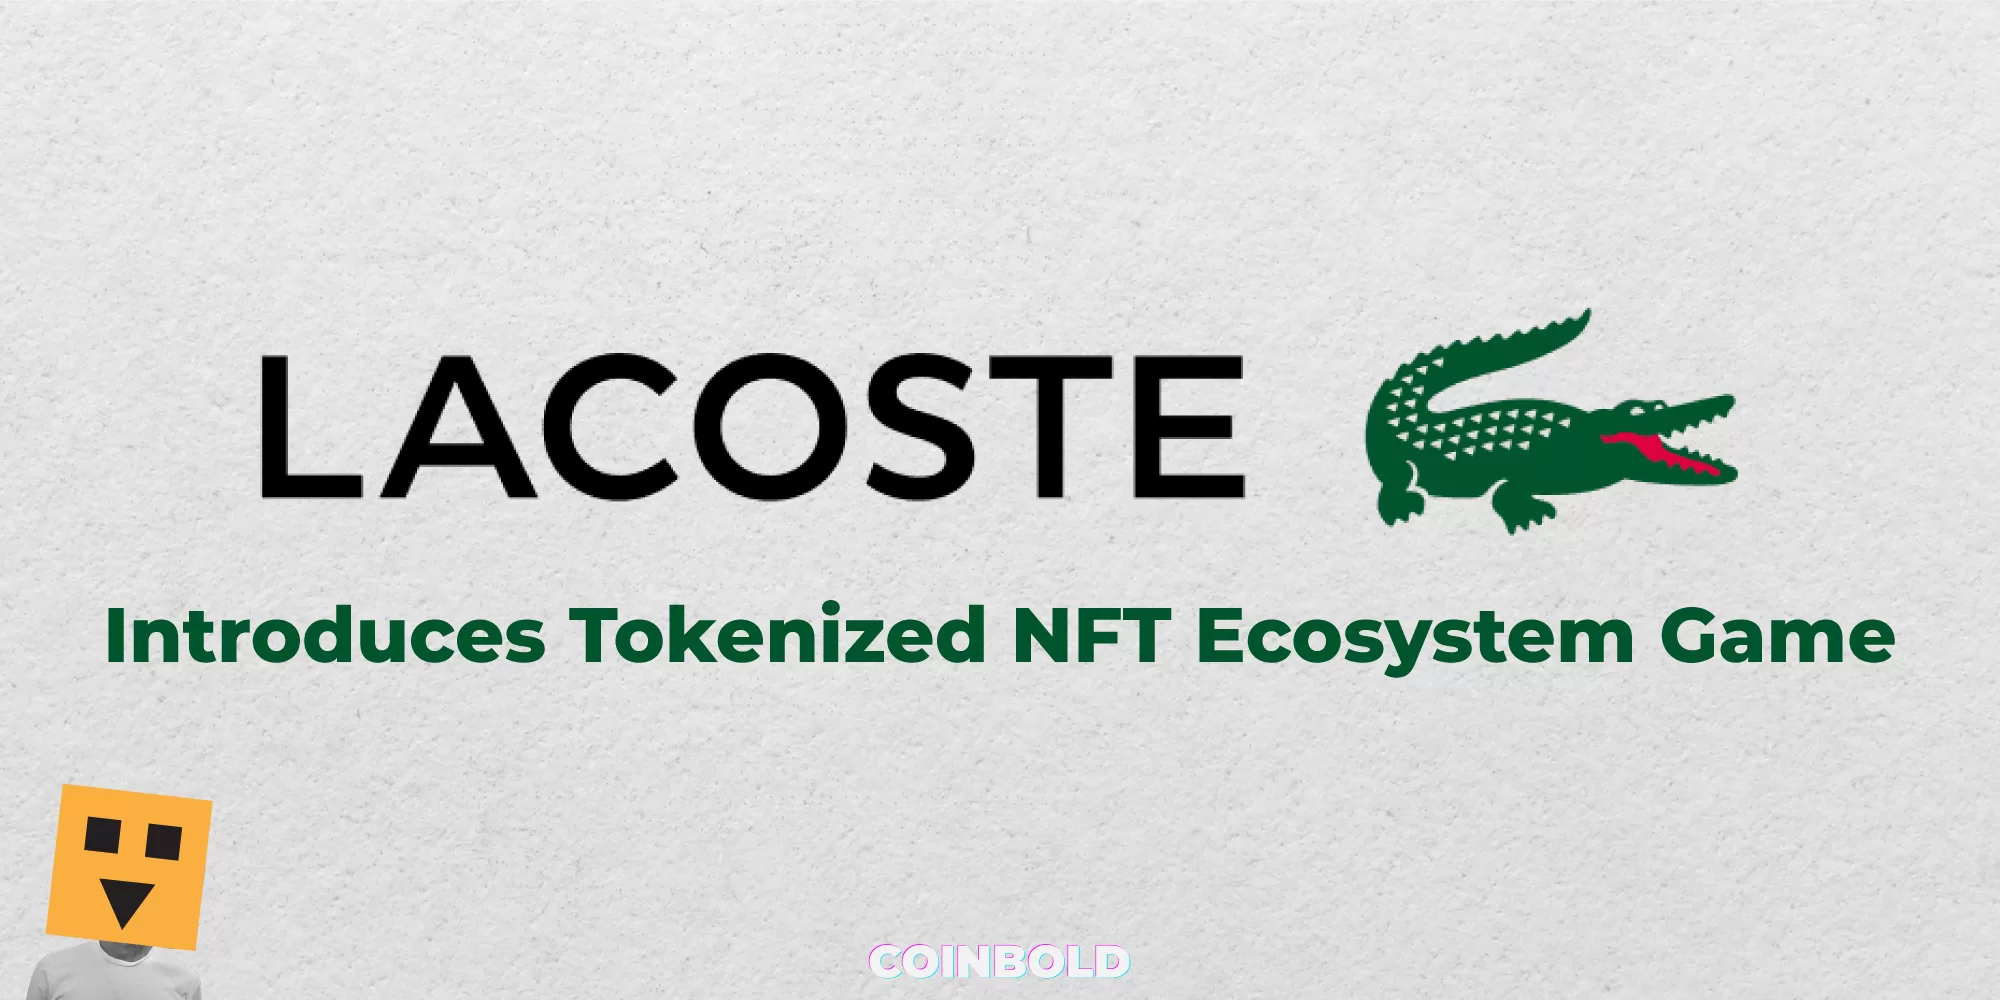 Lacoste Introduces Tokenized NFT Ecosystem Game